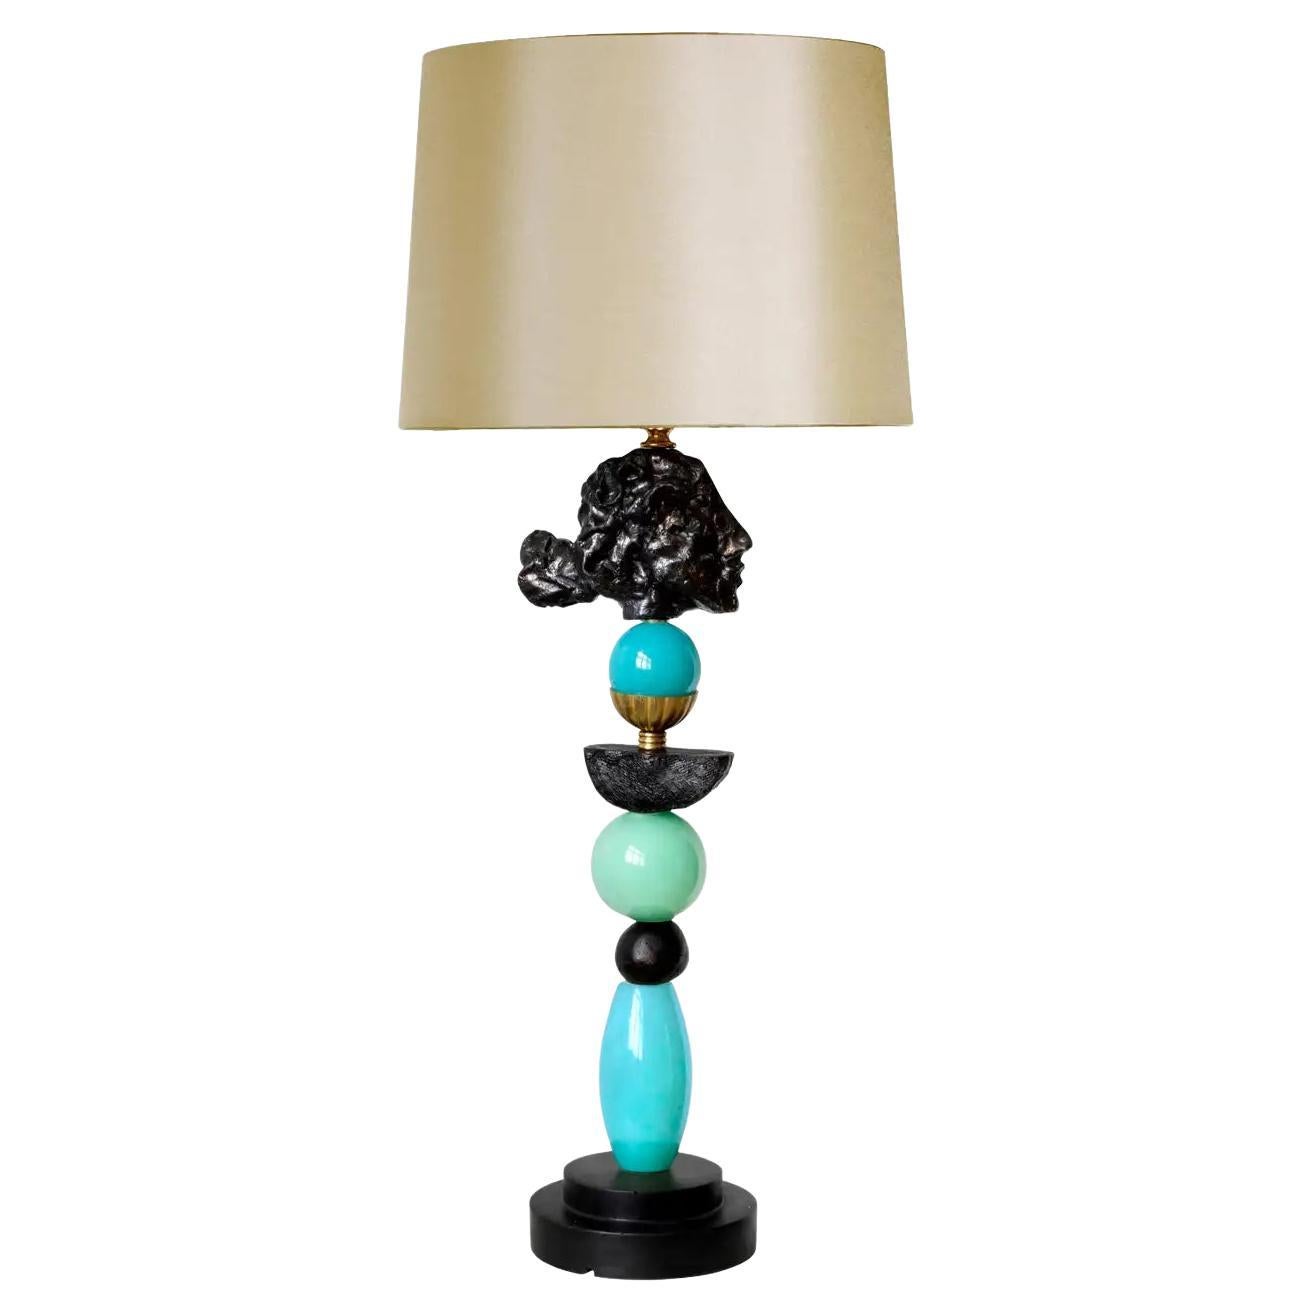 Eos Table Lamp by Margit Wittig, Blue and Green Glass with Sculpted Portrait